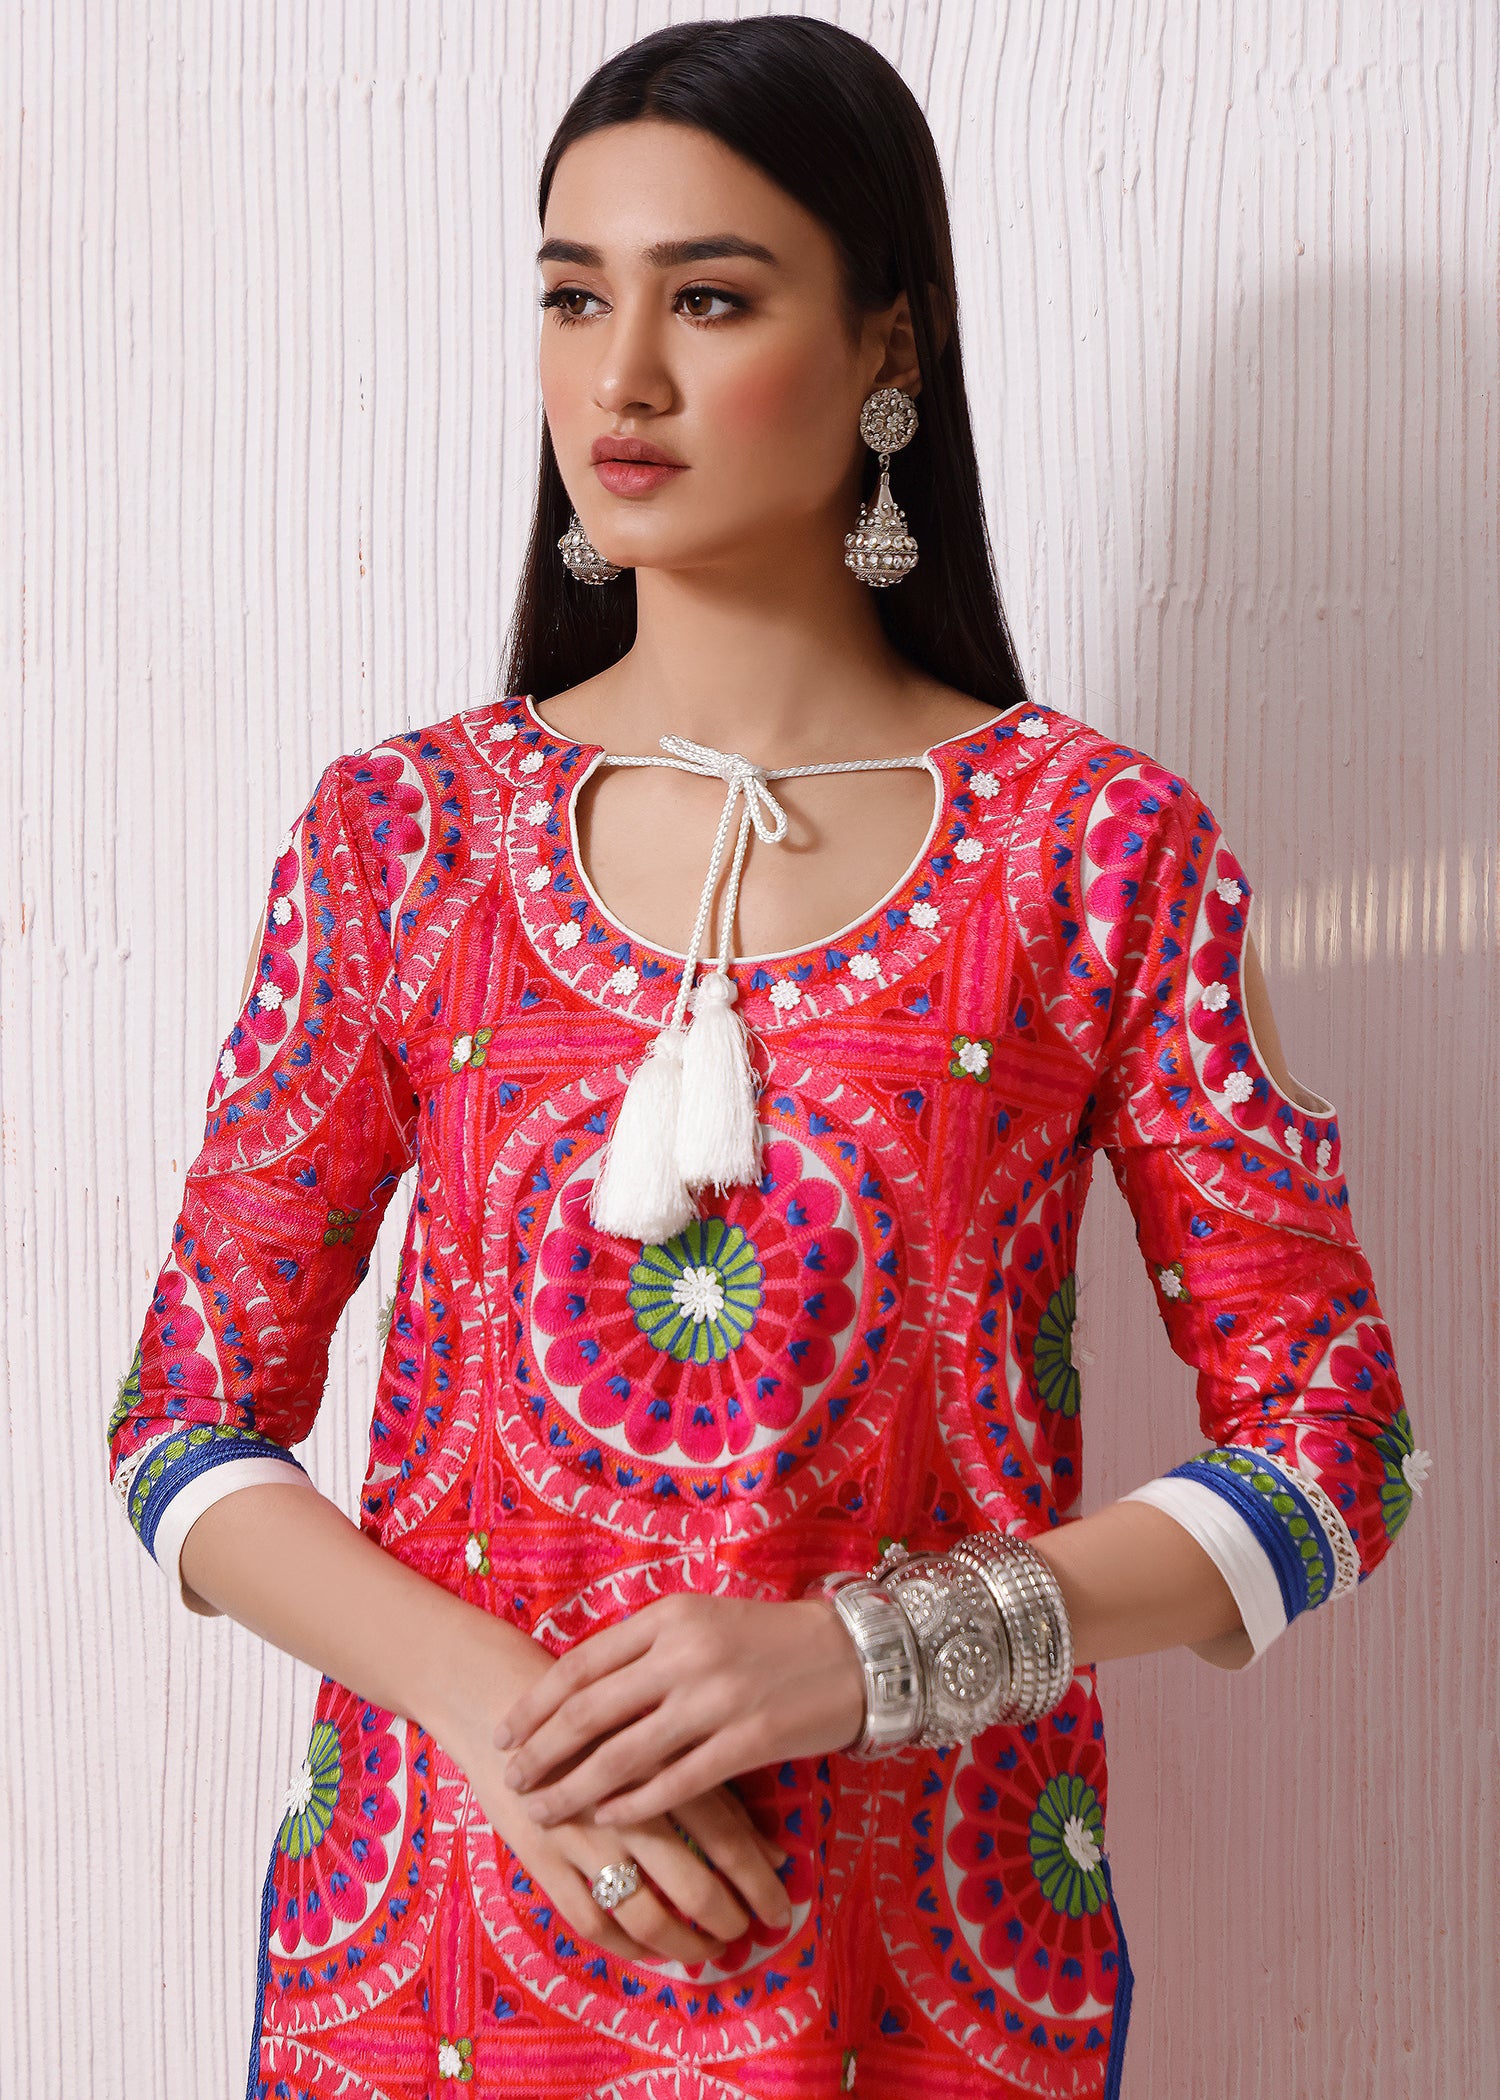 Latest collection By Rizwan Beyg. Evening wear | Printed design